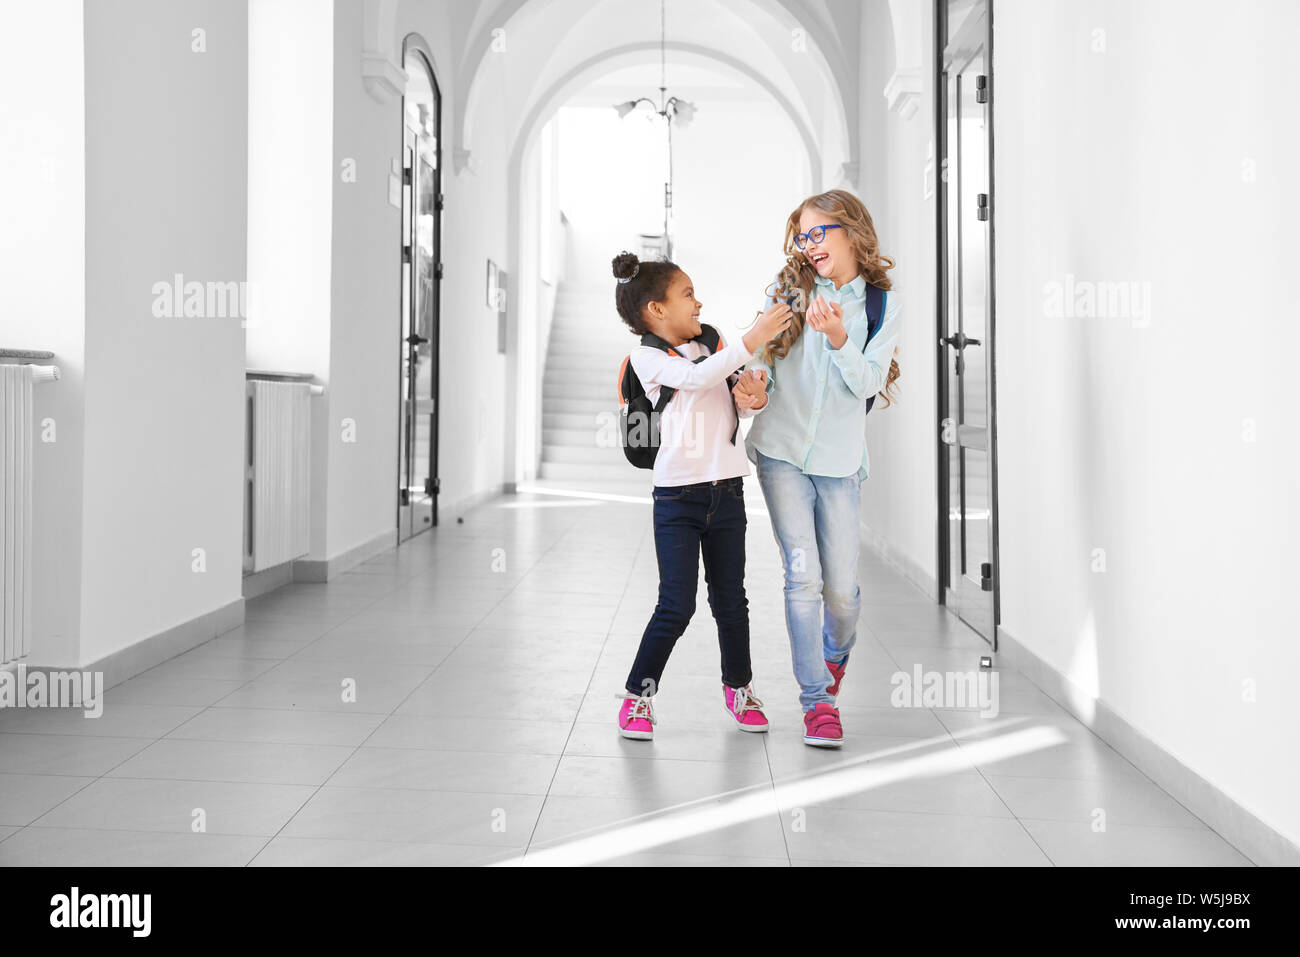 Two funny school girls playing and having fun together, running on long corridor. African and Caucasian girl with different in age studying together in International school. Concept of friendship. Stock Photo